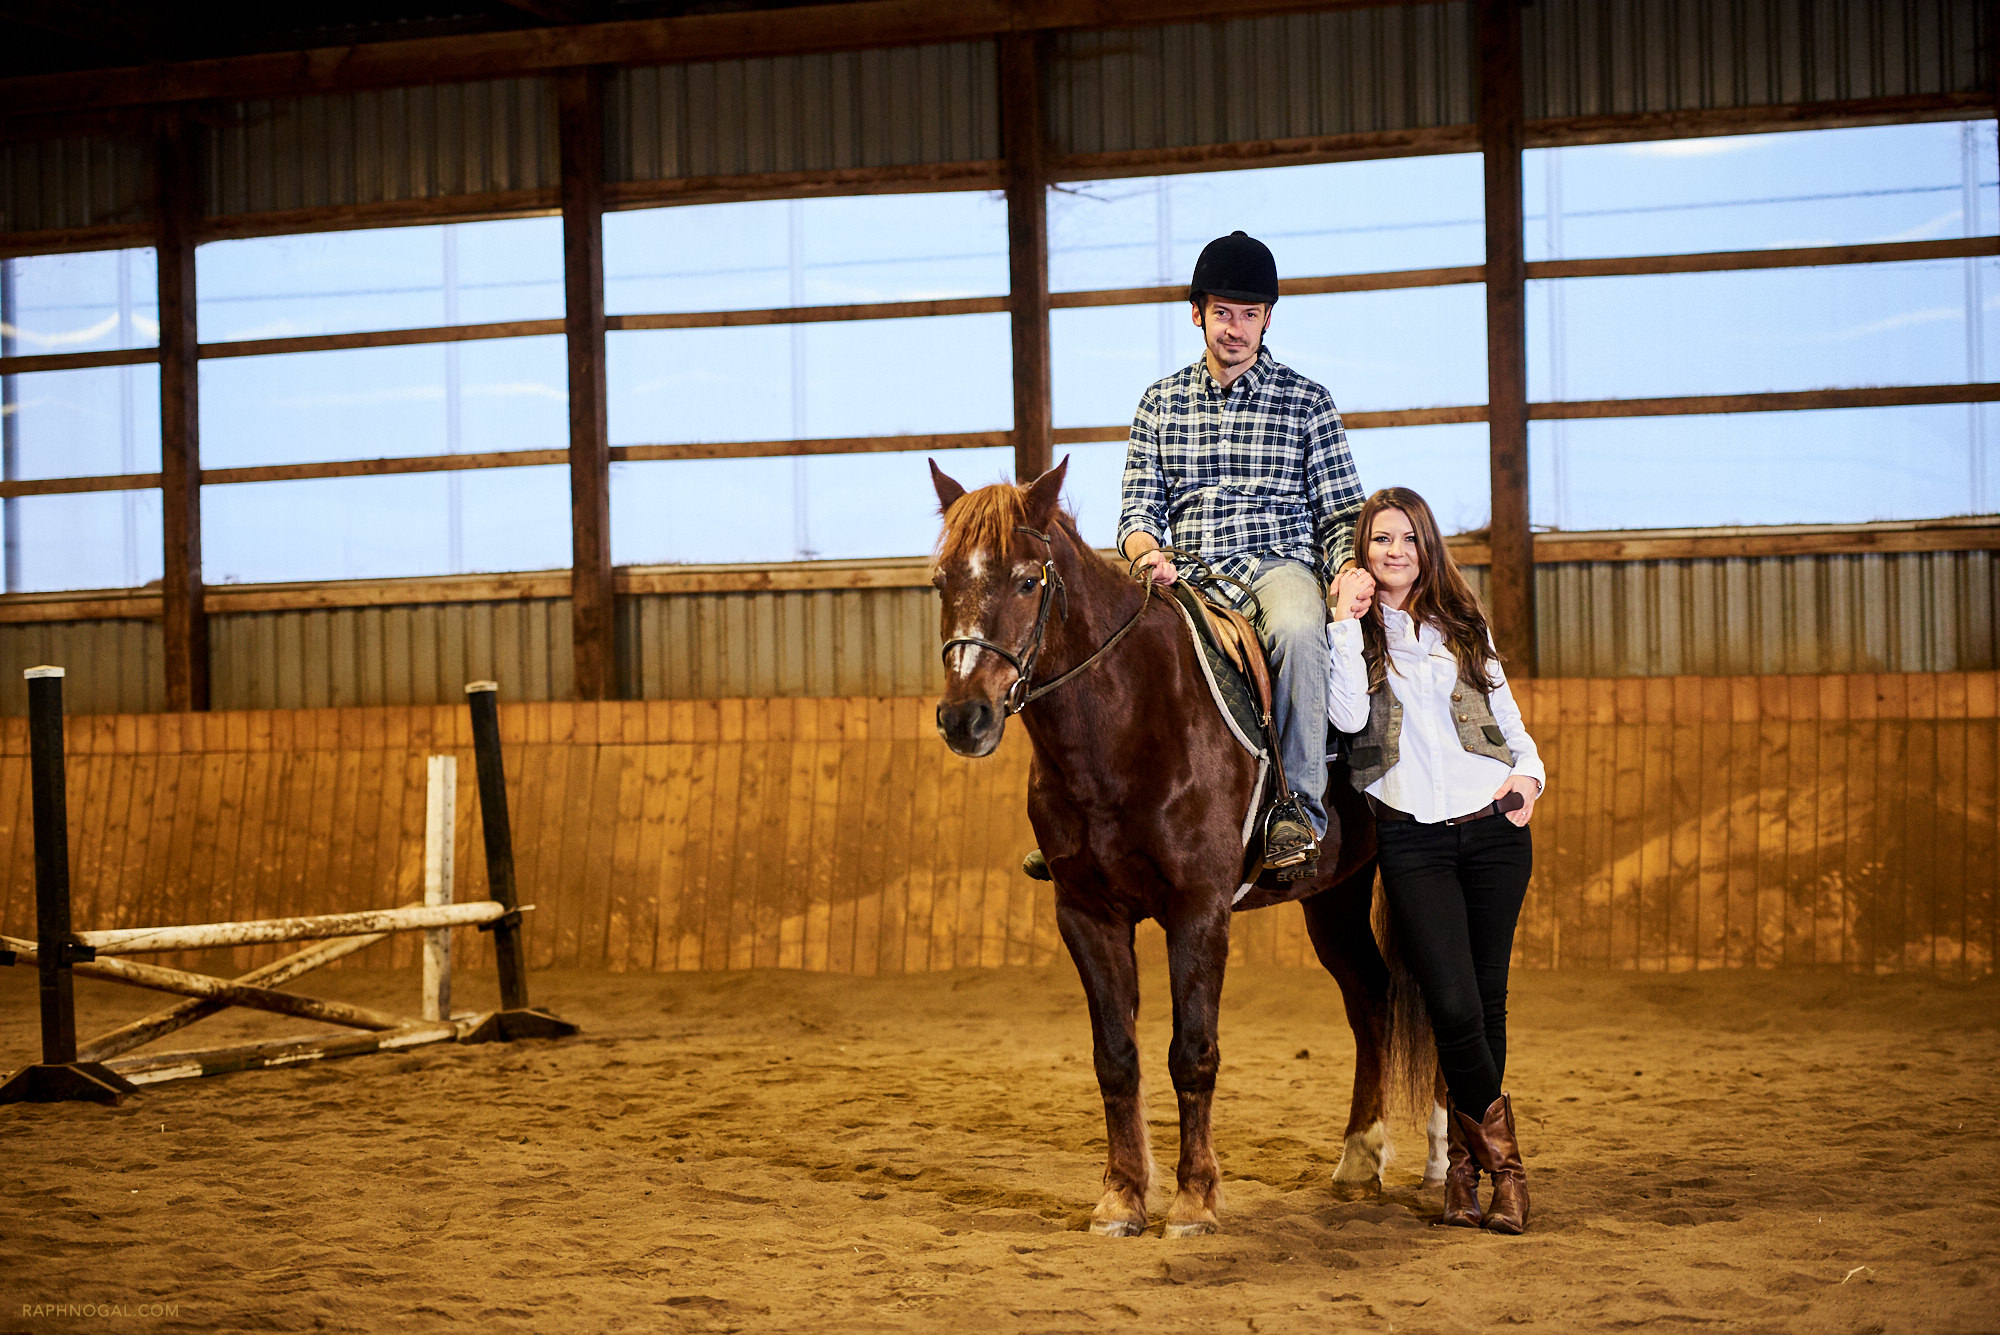 Stonewood Riding Academy in Canada, North America | Horseback Riding - Rated 0.8